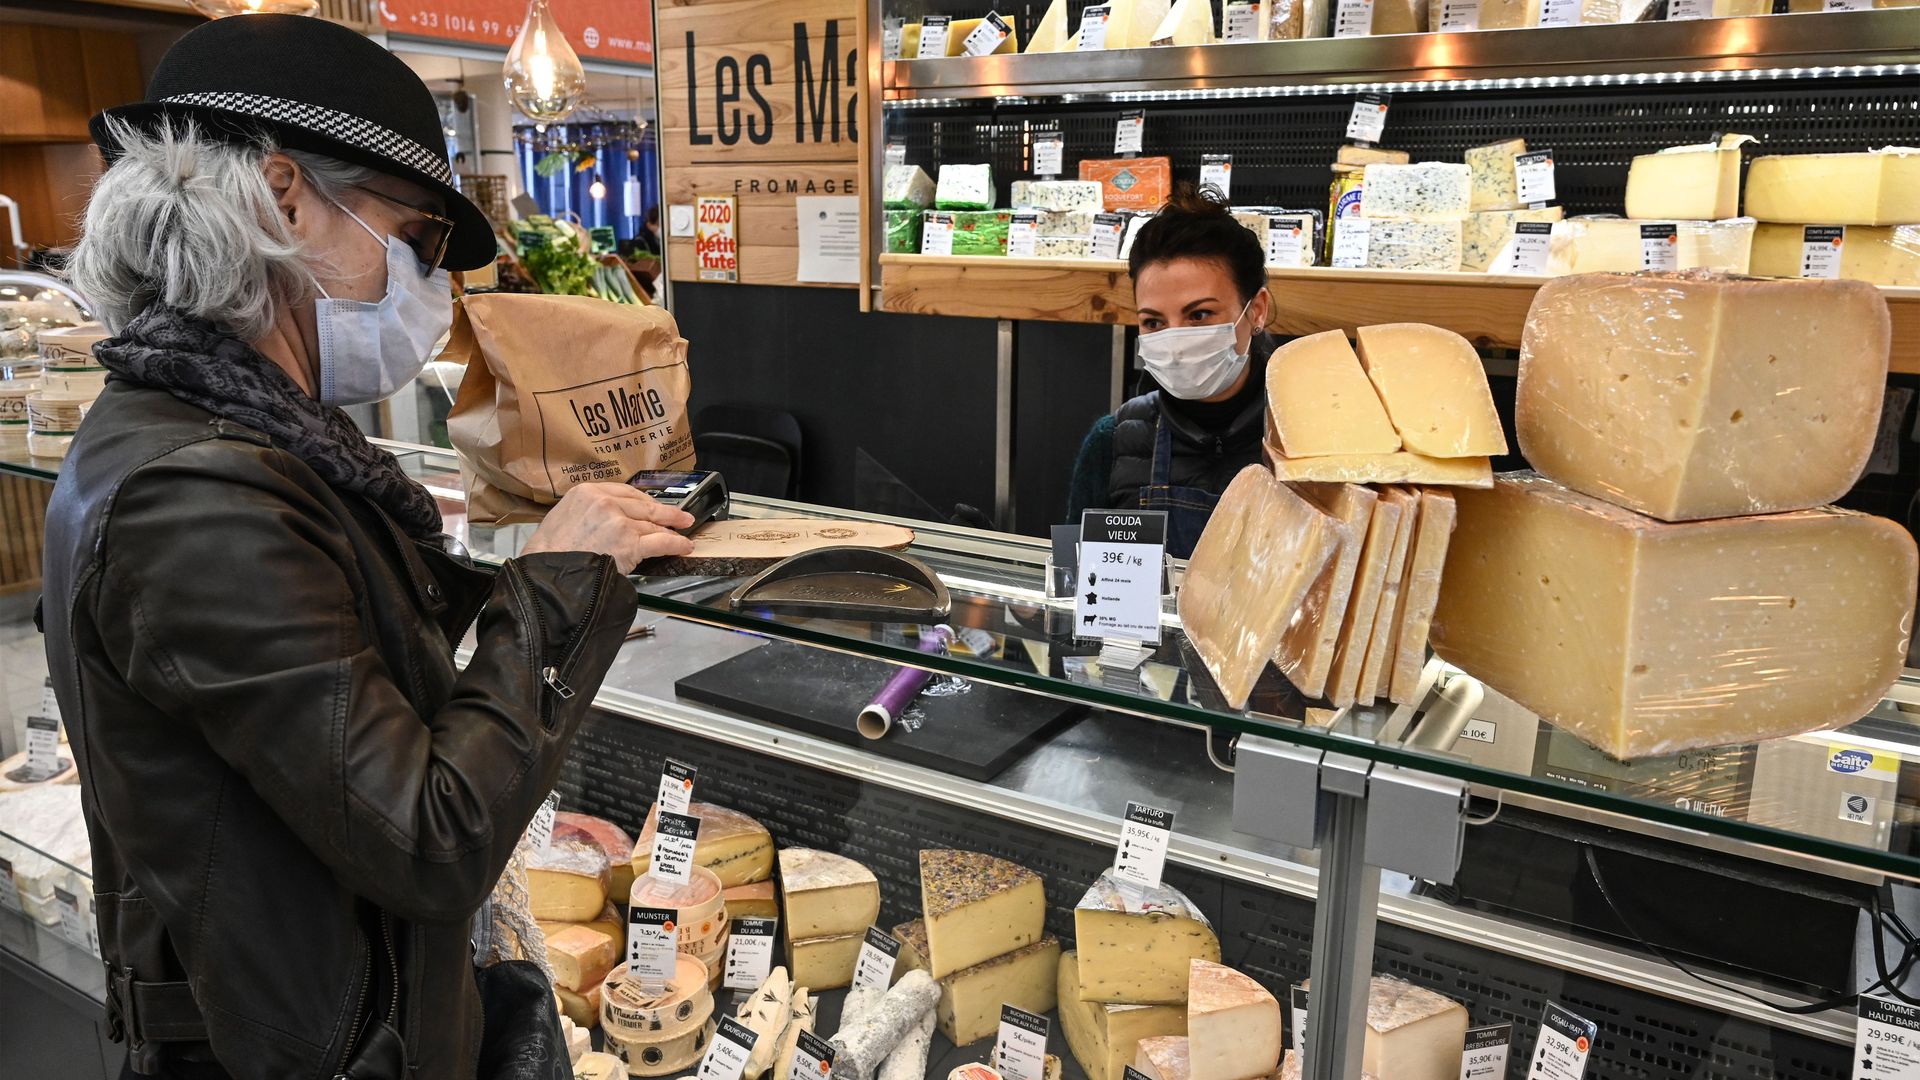 A woman wearing a protective face mask buys cheese at a store in the center of Montpellier, south of France, on March 25